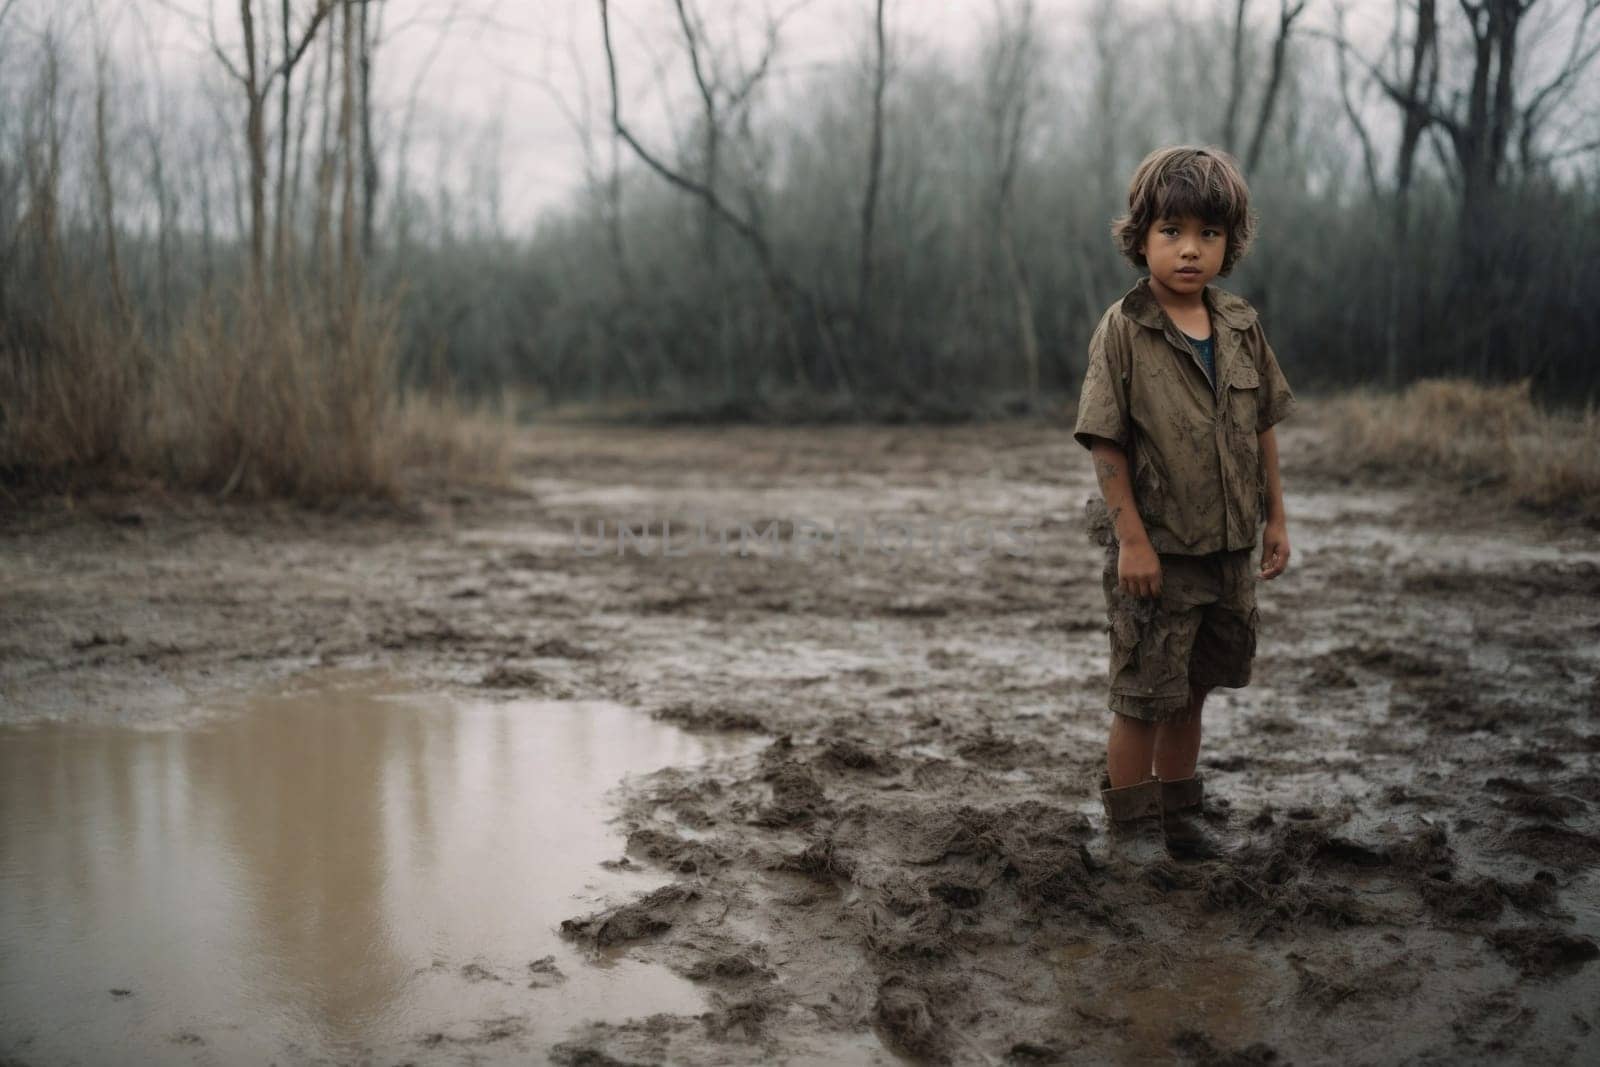 A young boy stands in a muddy puddle, splashing and exploring the water.